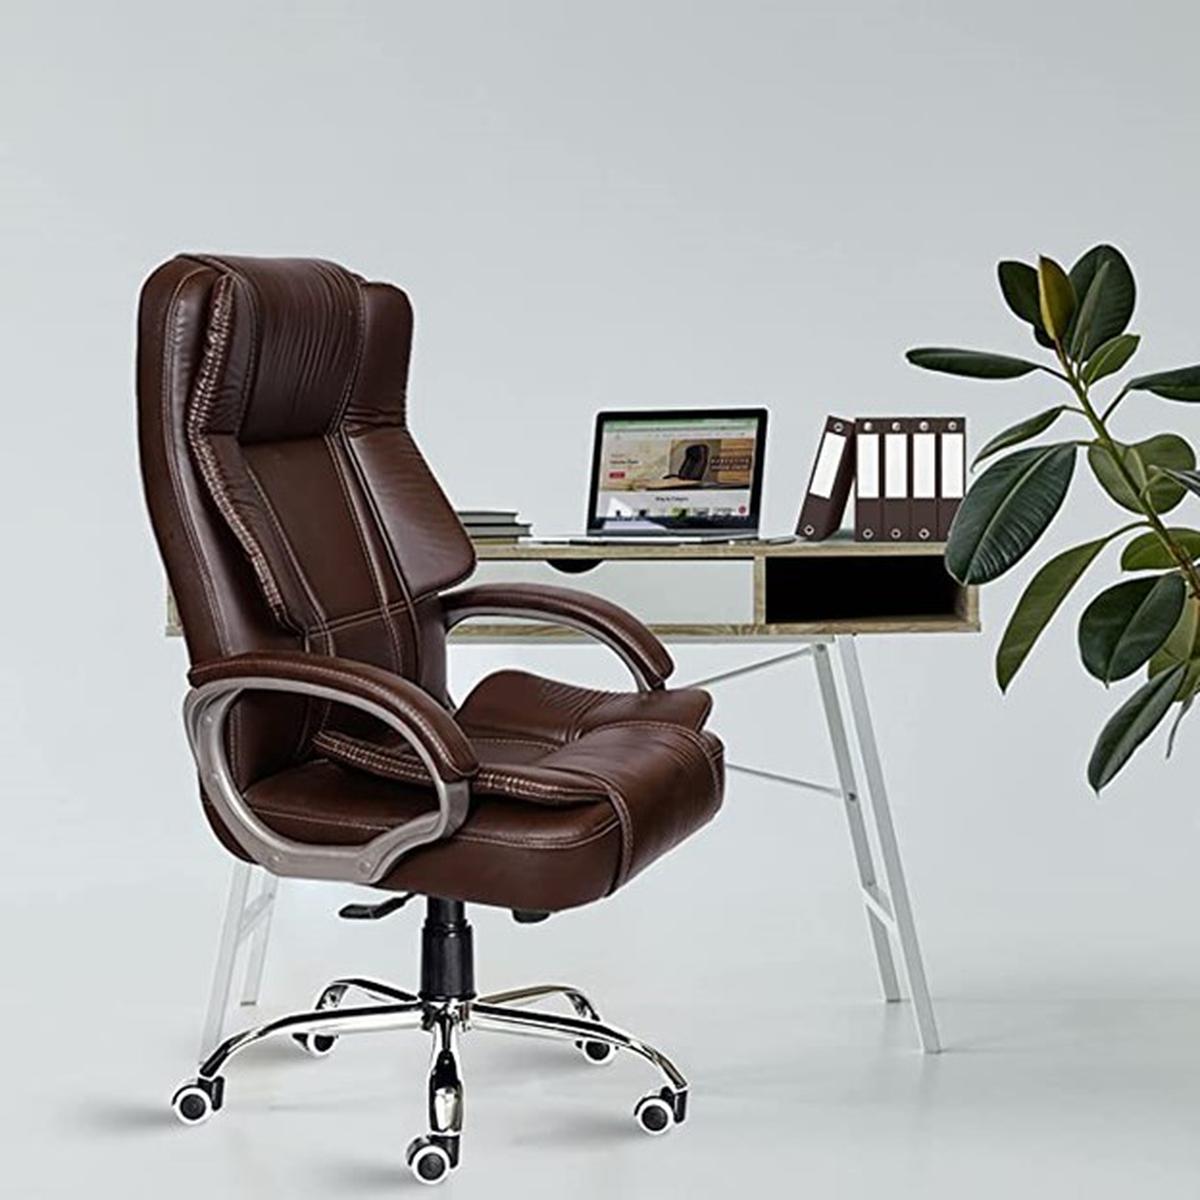 Best Office Chairs - The Hindu